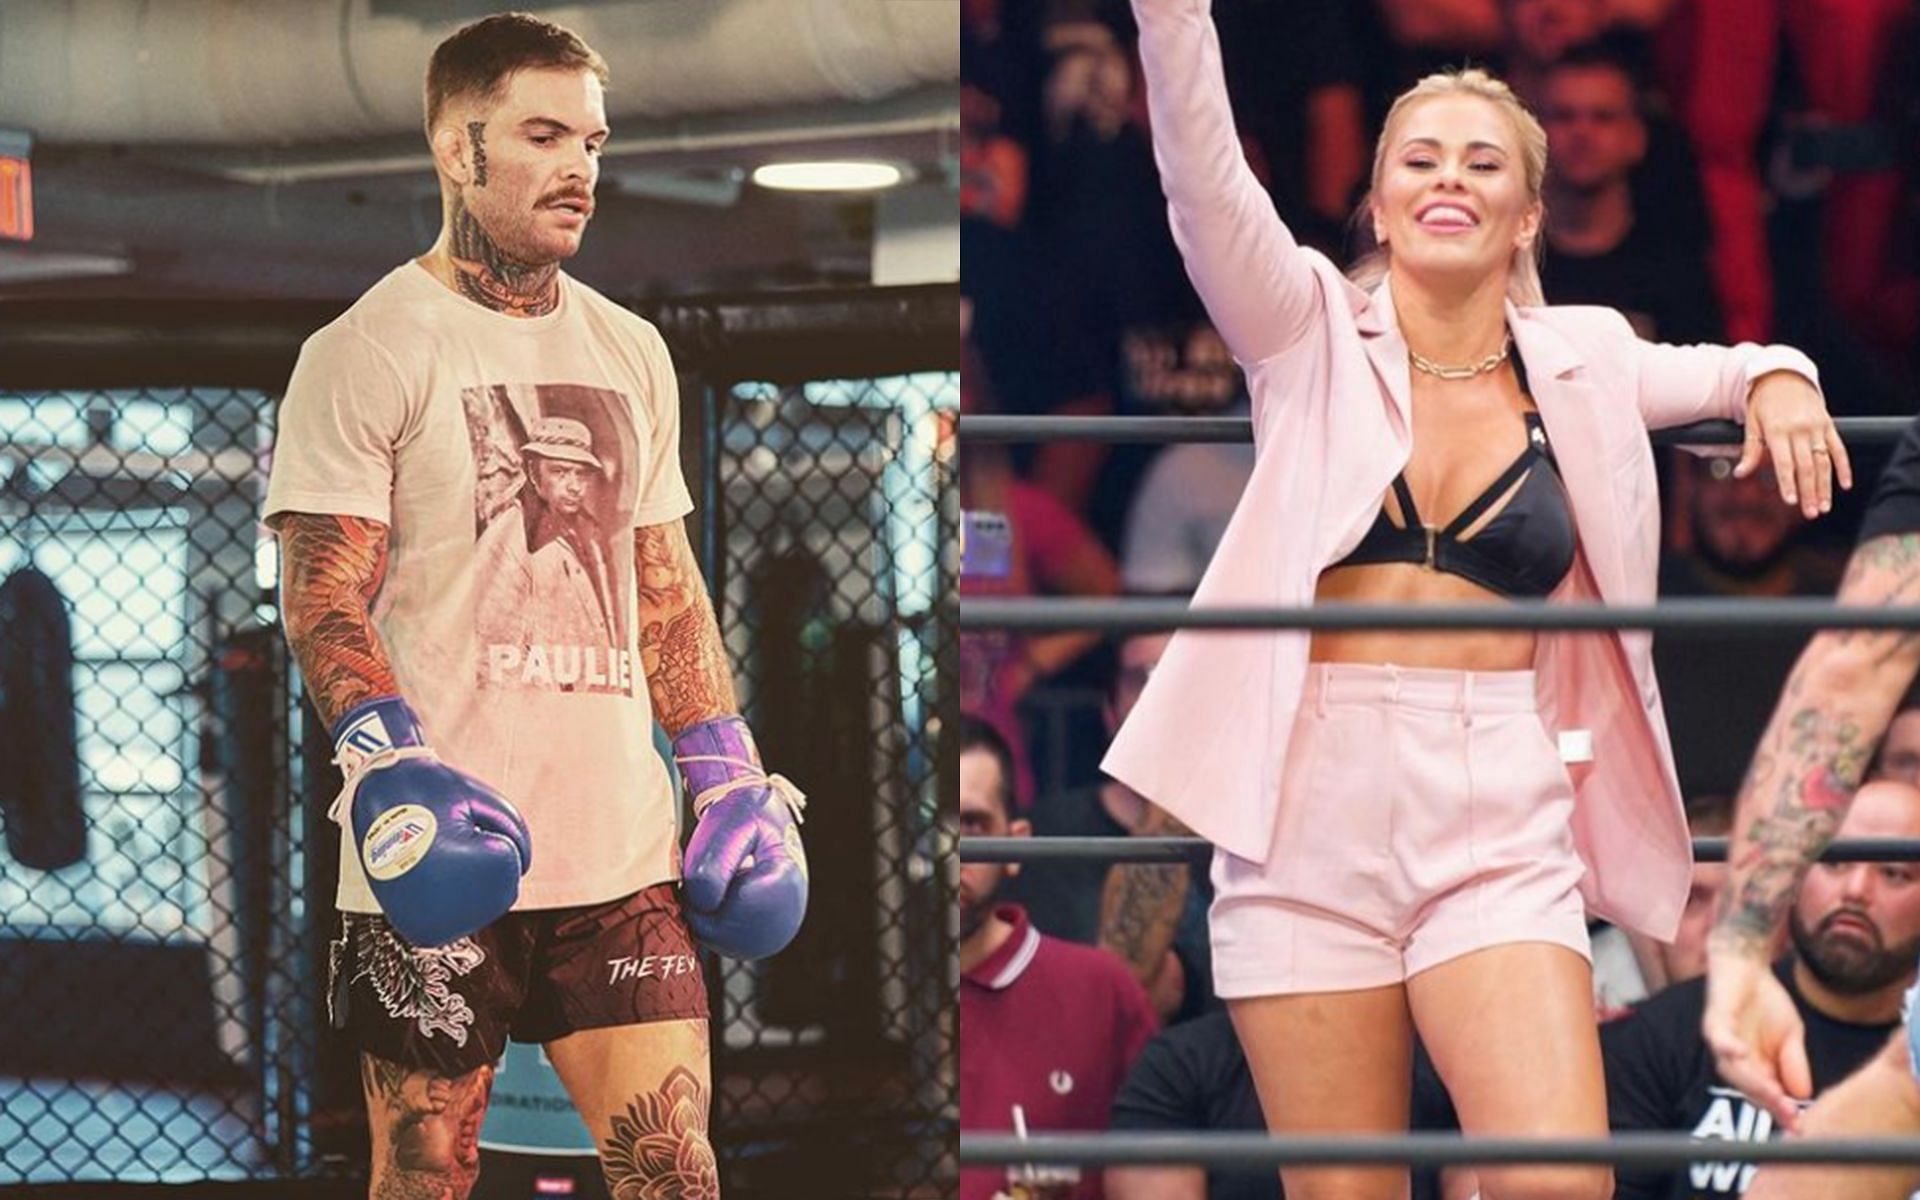 Cody Garbdandt (left) and Paige VanZant (right) were briefly linked with each other during their initial run with the UFC [Images Courtesy: @cody_nolove and @paigevanzant Instagram]